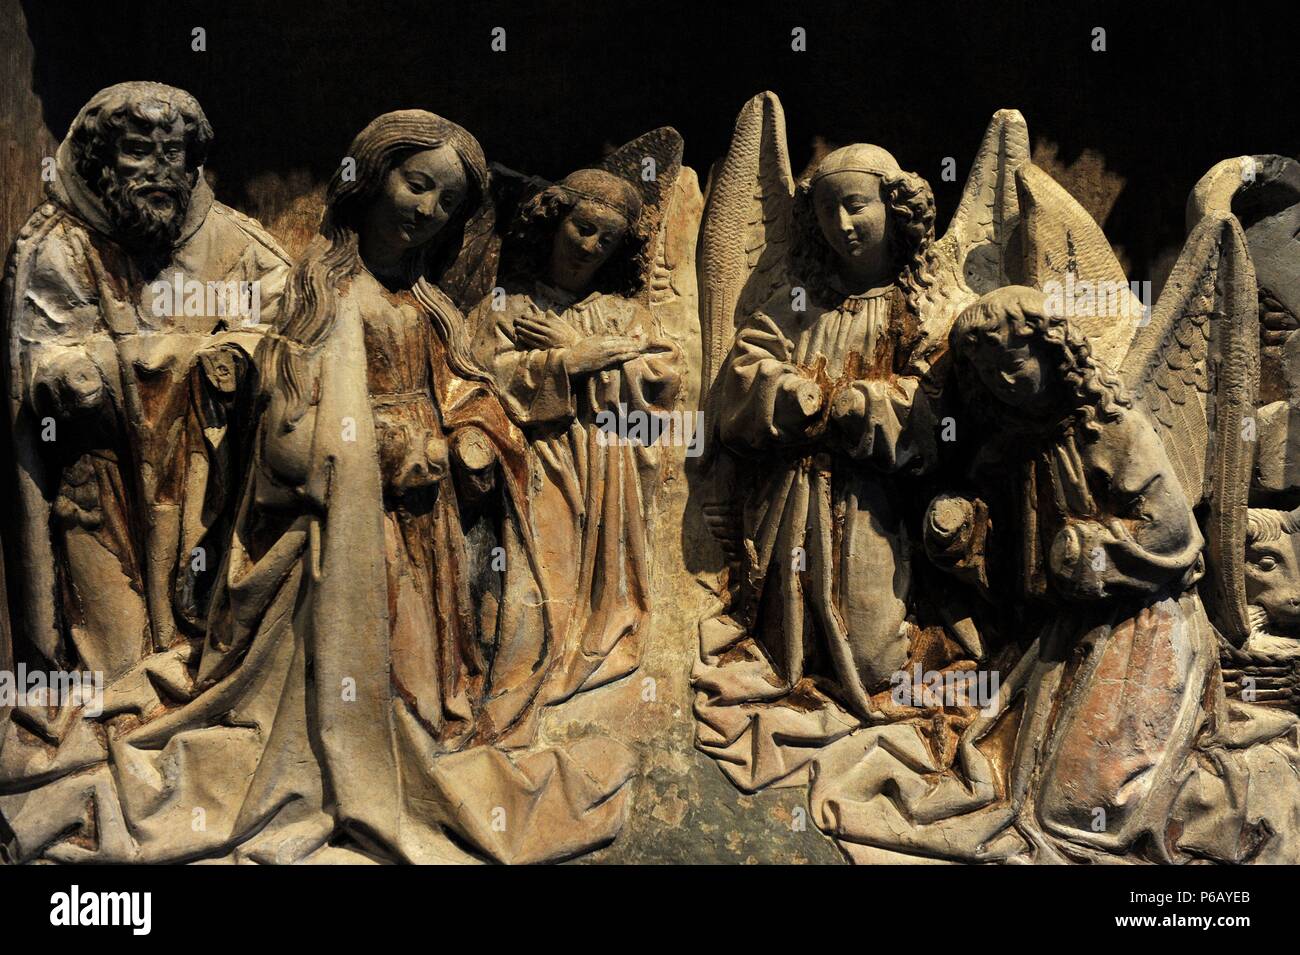 Altarpiece of Saint Lambert. Utrecht, 1470-1480. Clay. Dedicated to the life of Mary. Detail. Nativity. From the chapel of the convent of St Lambert Malassis.  Catharijneconvent Museum. Utrecht. Netherlands. Stock Photo